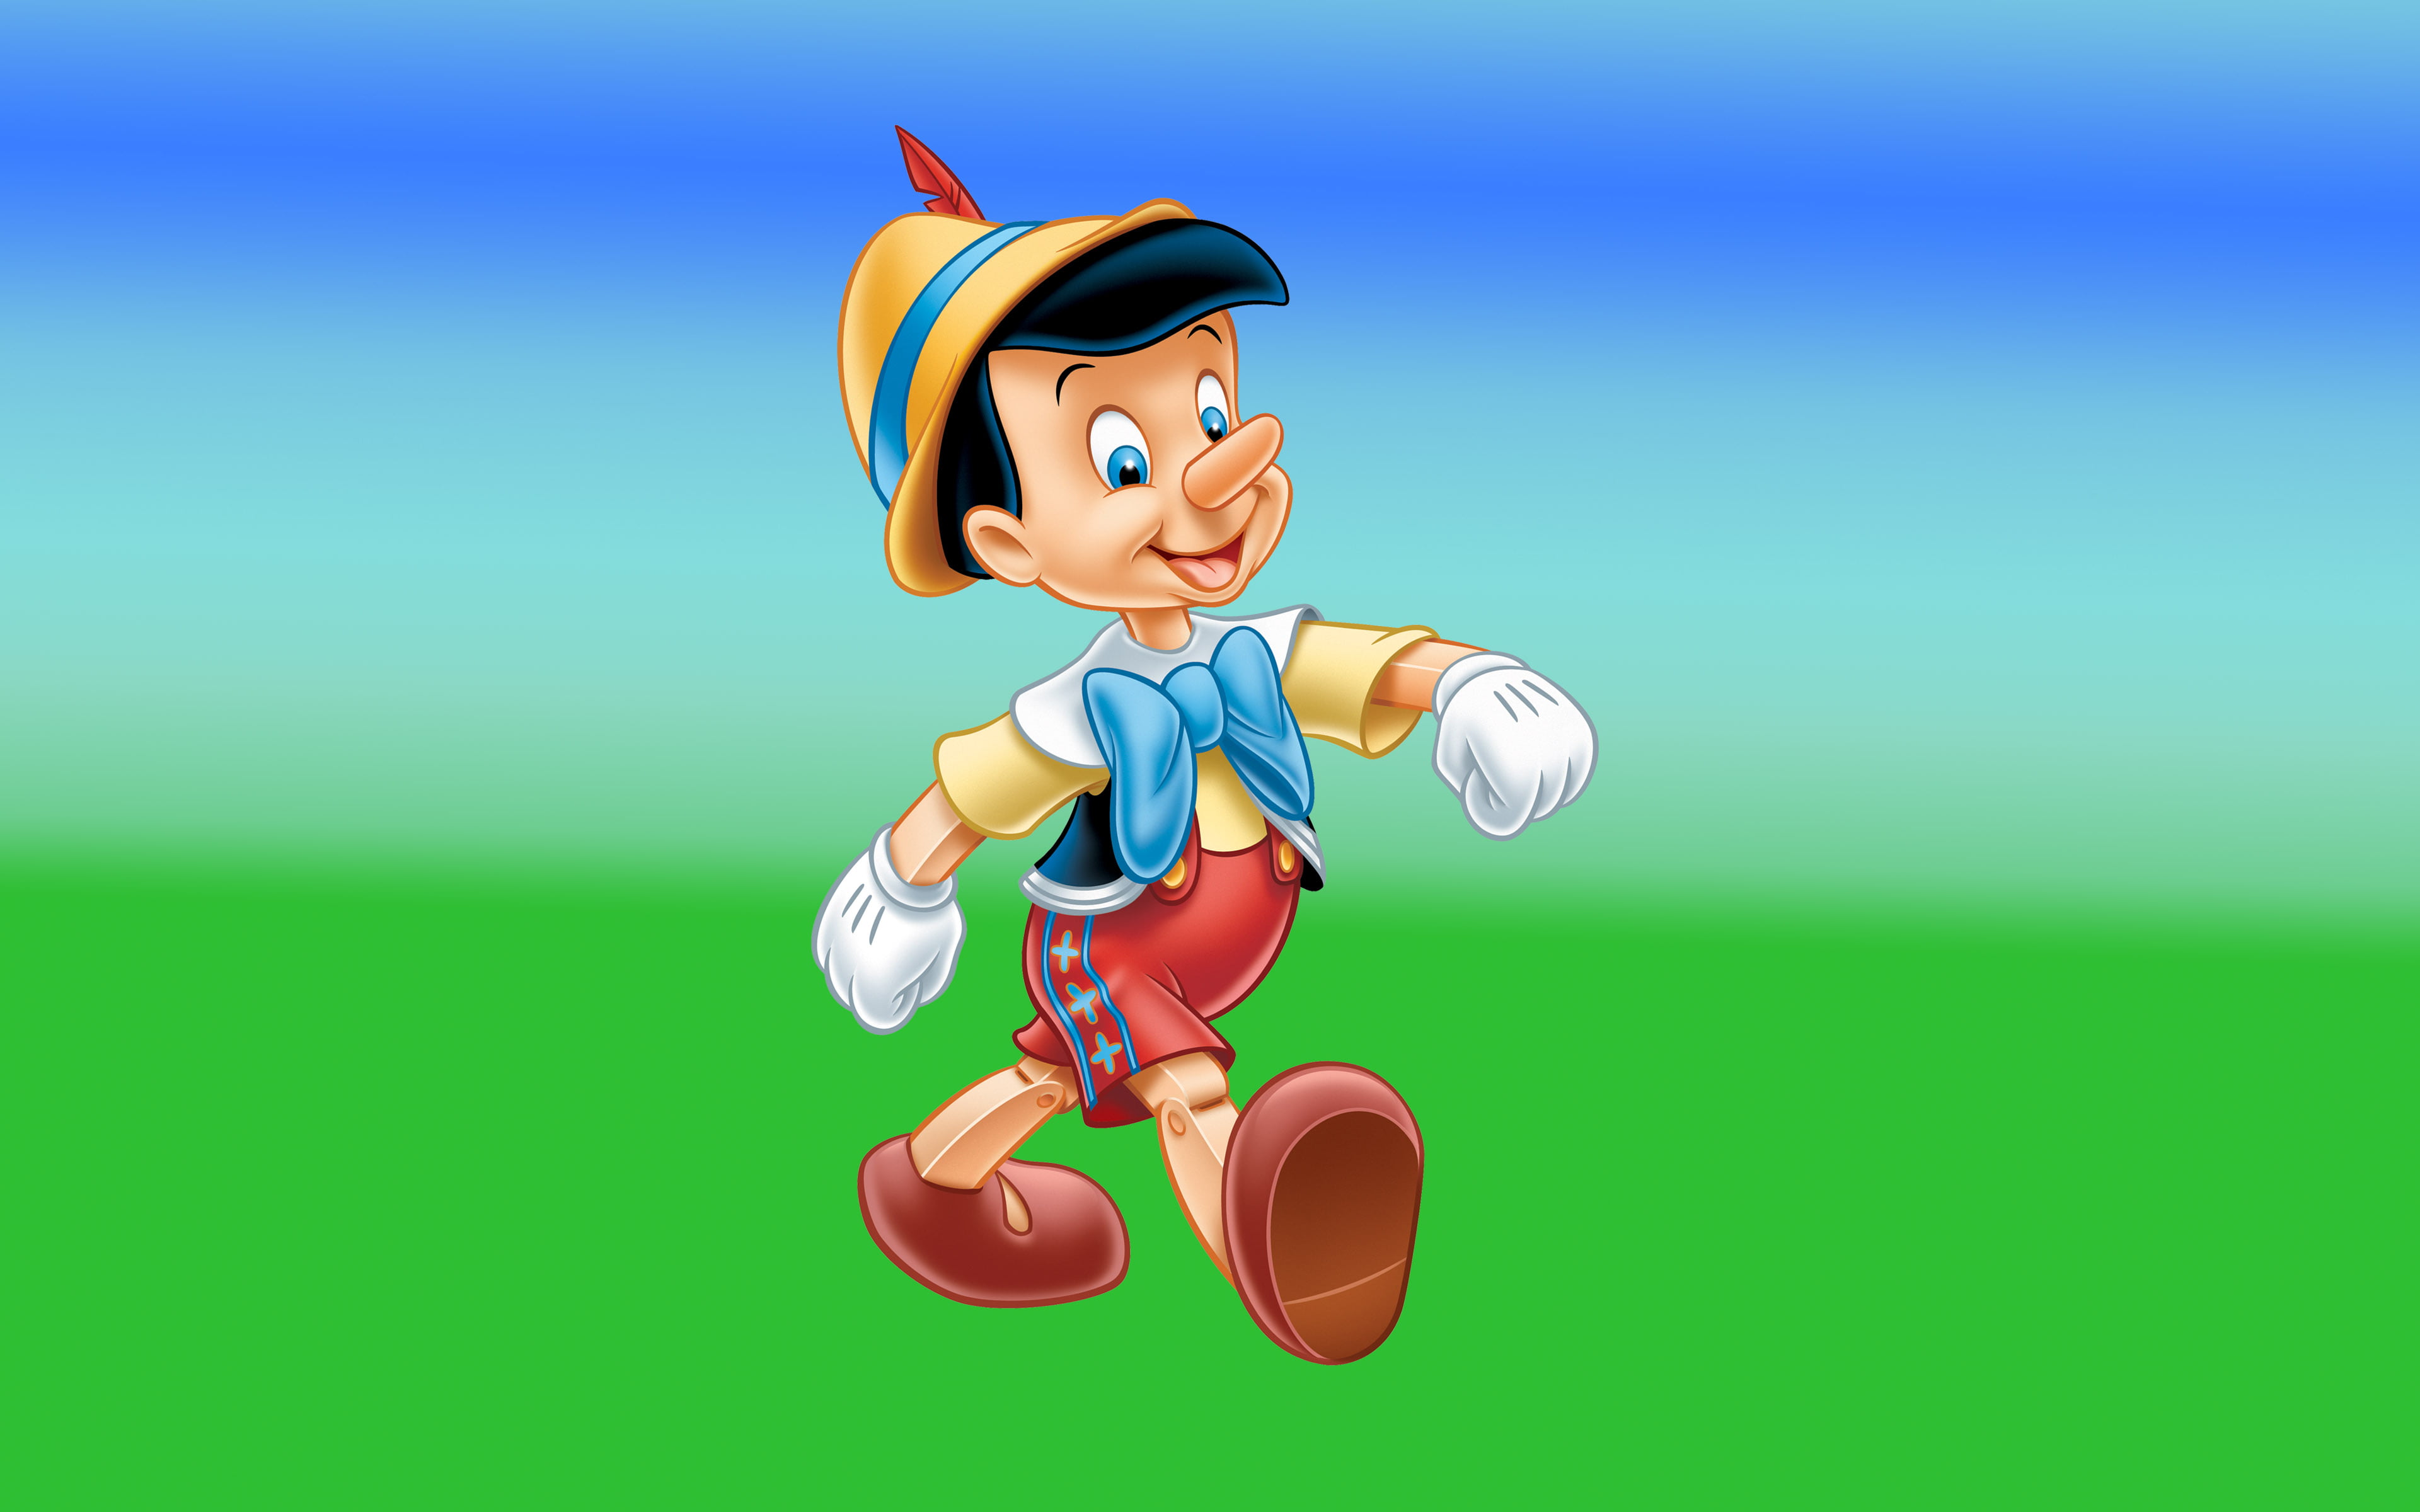 Pinocchio Disney Images Desktop Hd Wallpaper For Mobile Phones Tablet And Pc 3840×2400